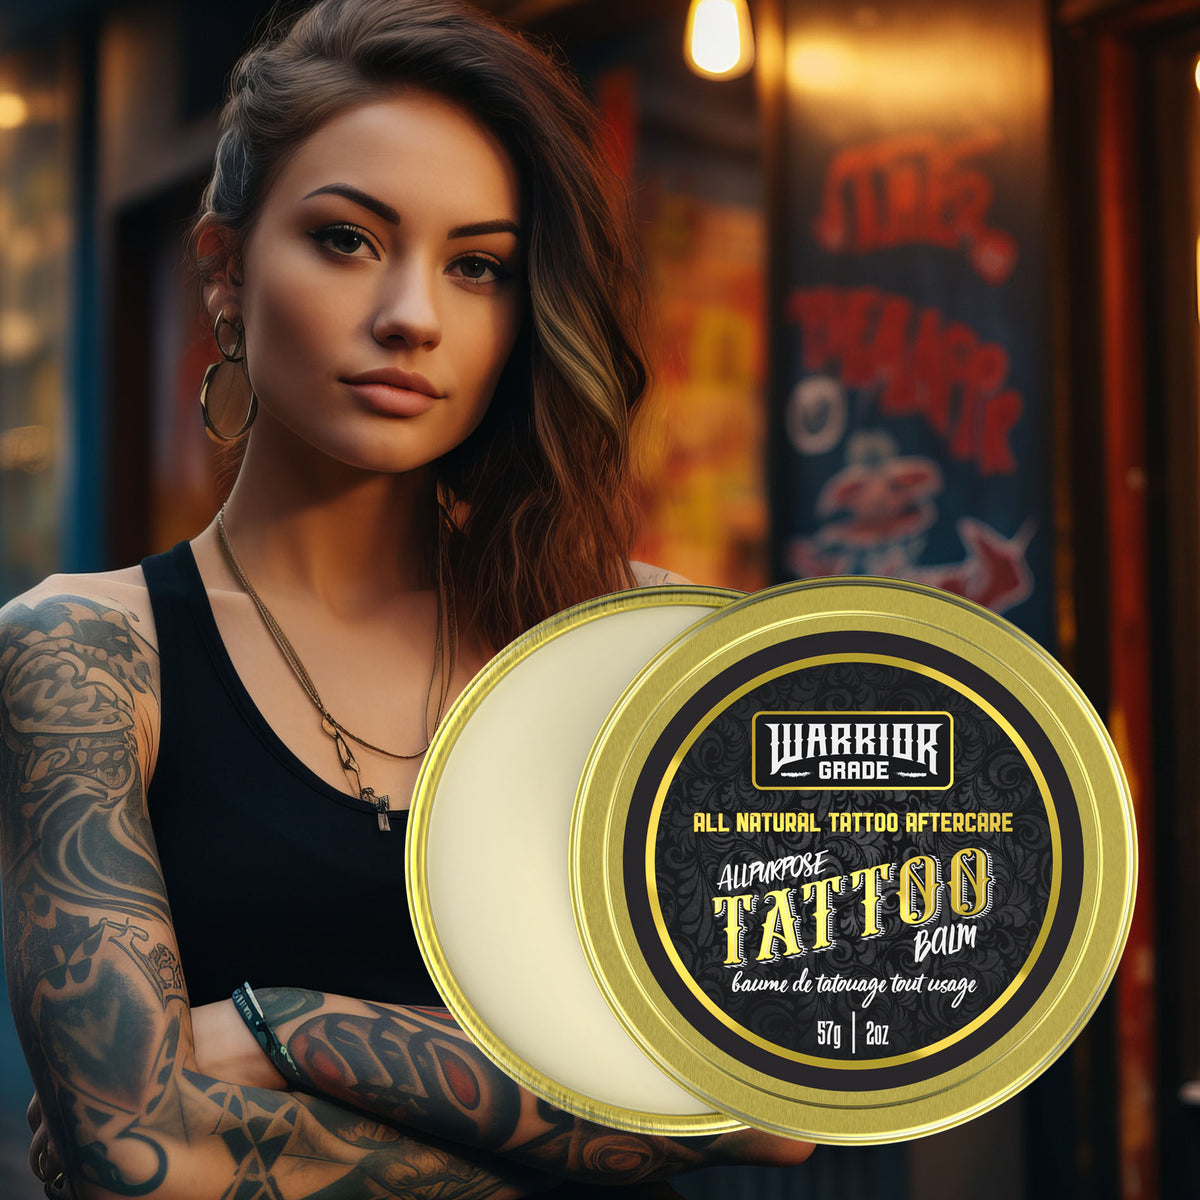 Beautiful tattooed woman with her arms crossed in neon lighting outside a tattoo shop. Marketing images of Valhalla Legends tattoo balm on the side